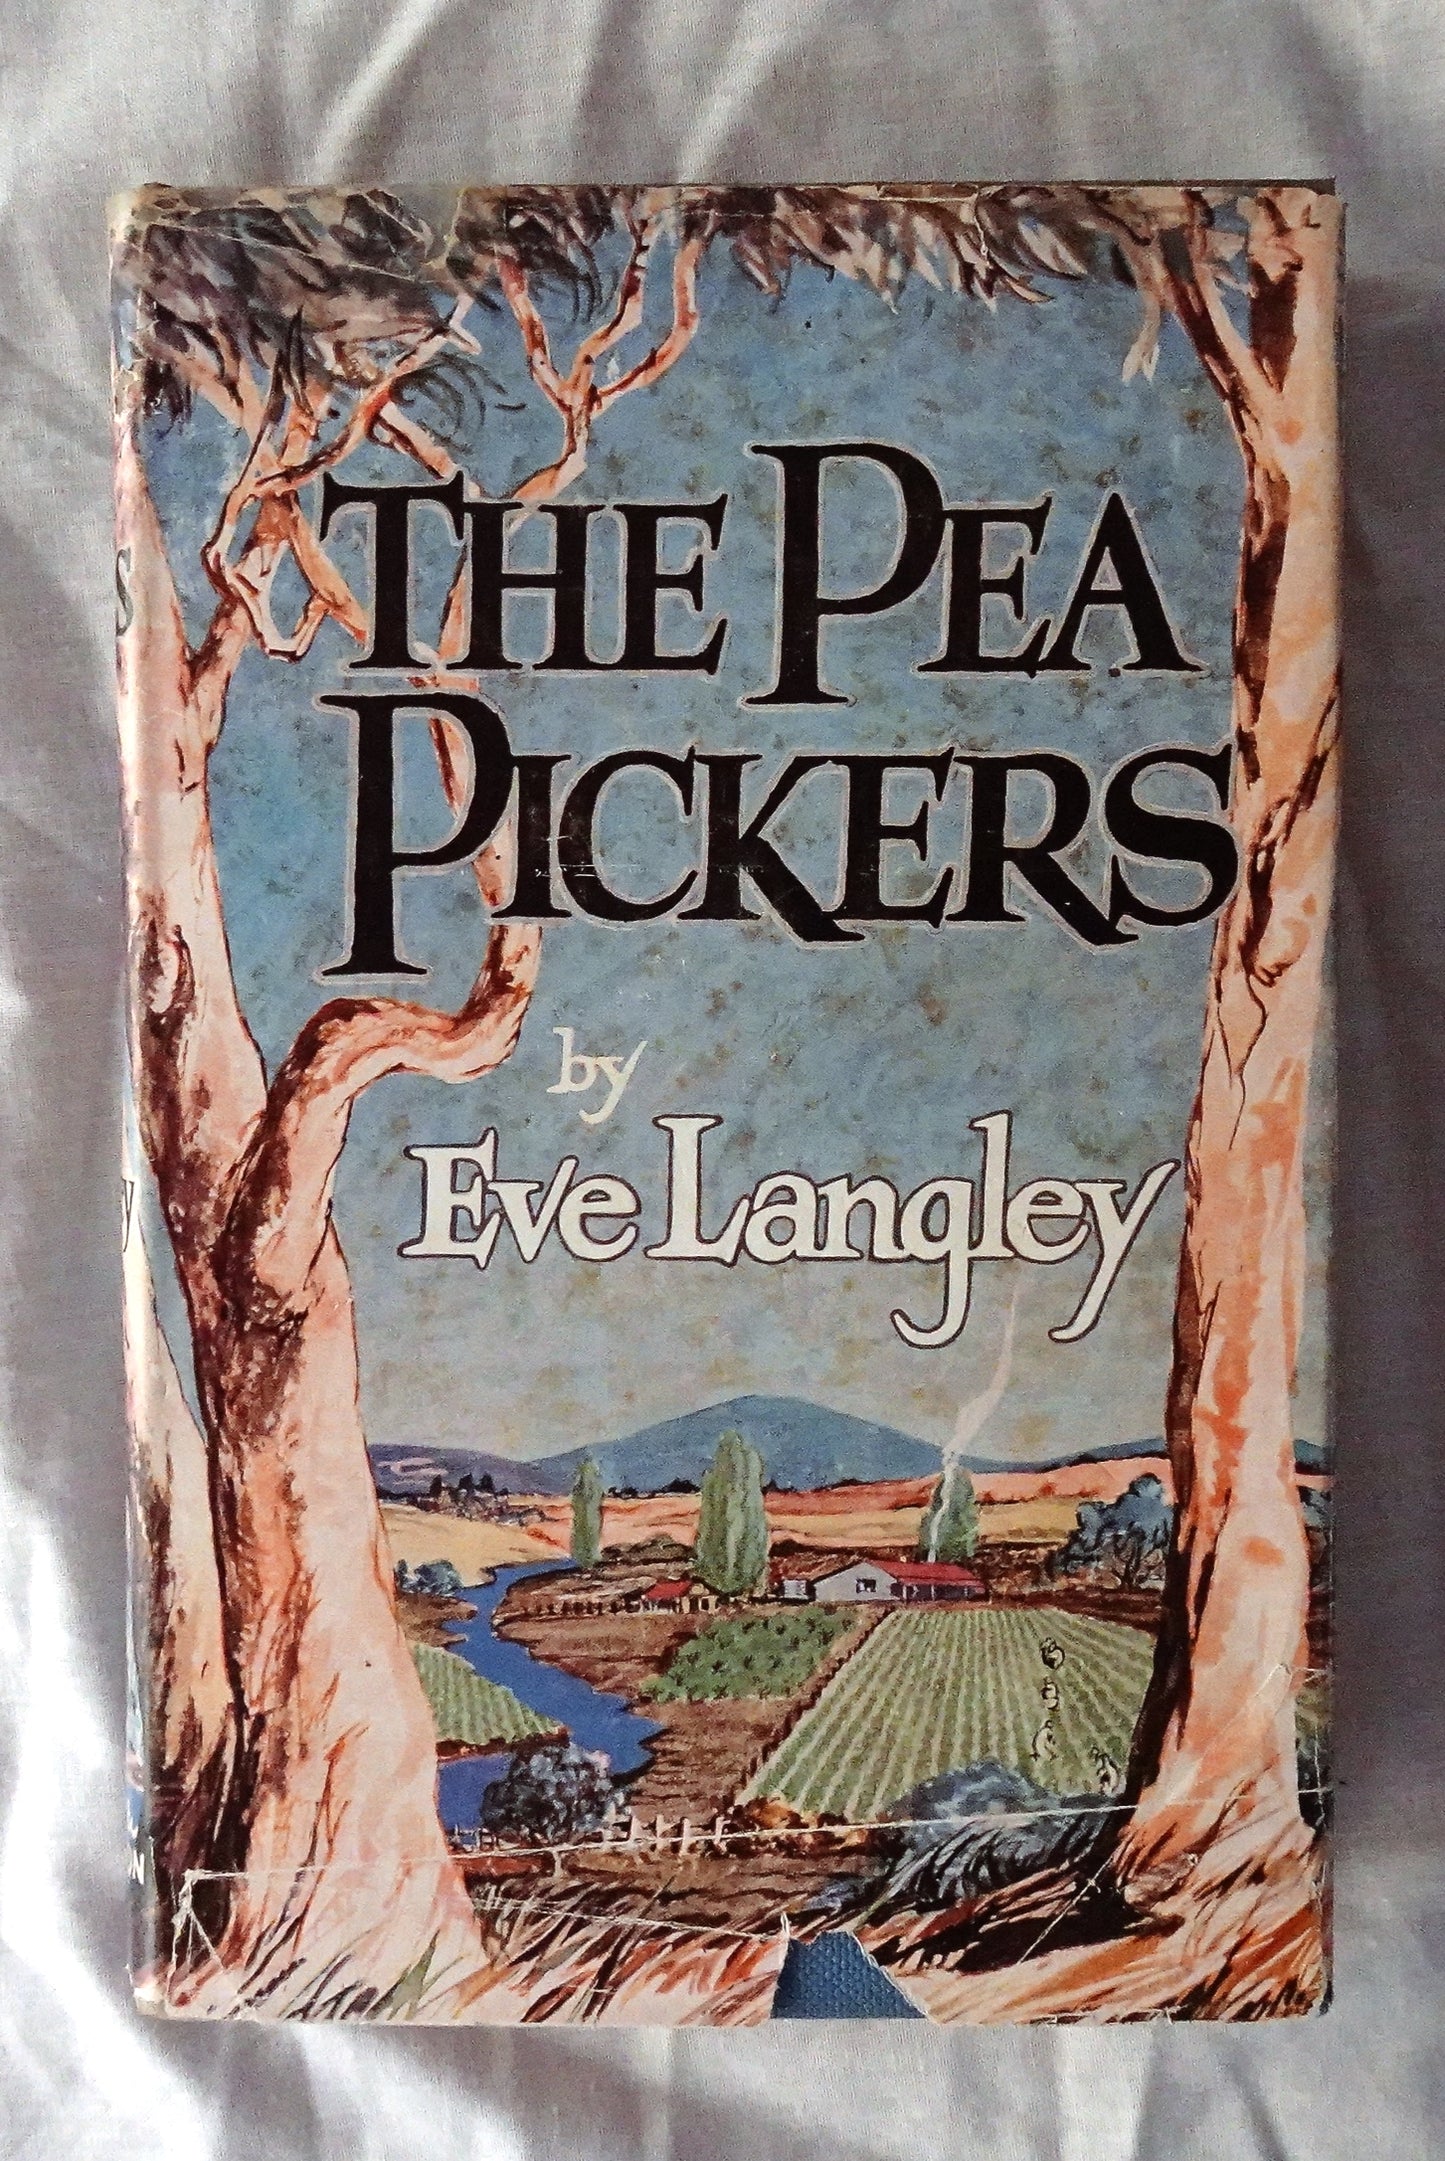 The Pea Pickers by Eve Langley